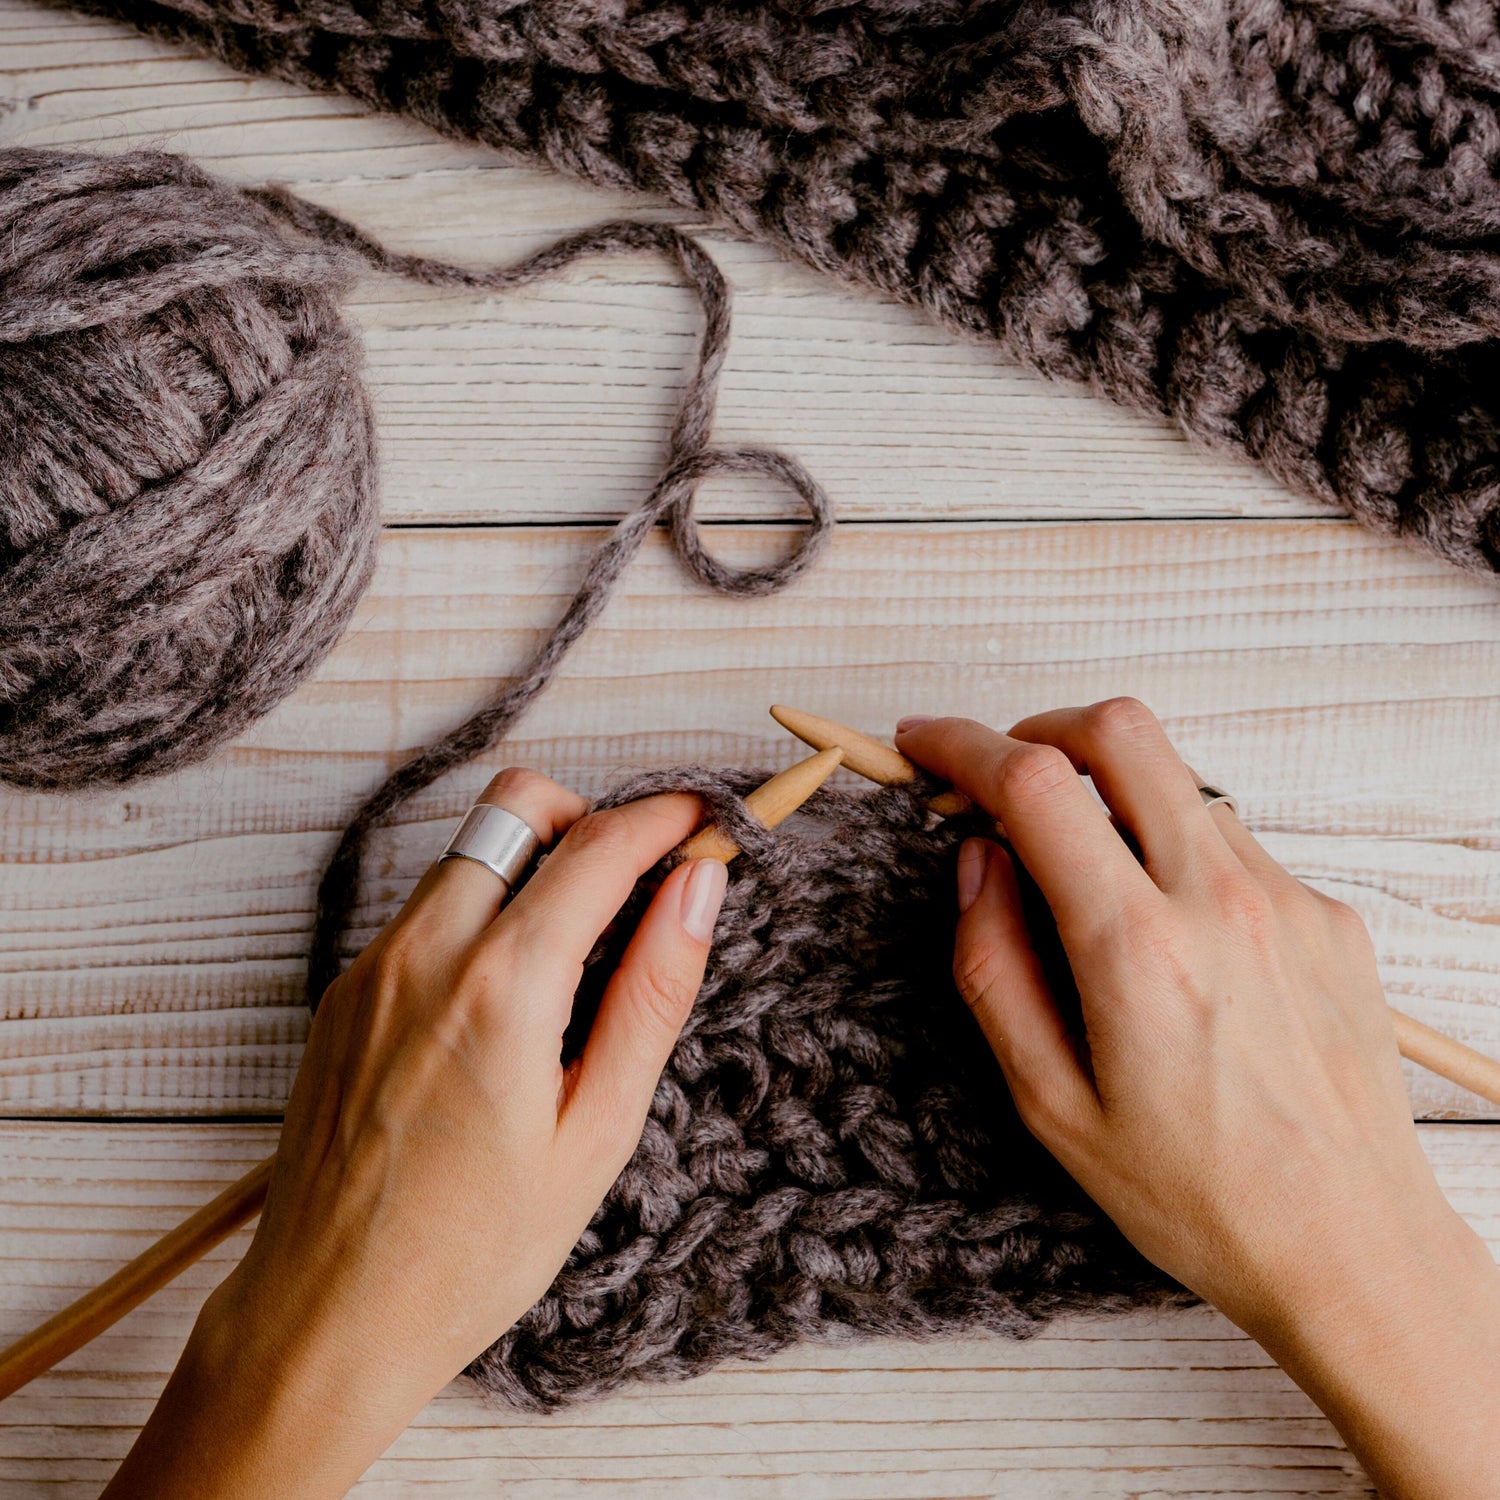 What Is Bulky Weight Yarn? - Handy Little Me